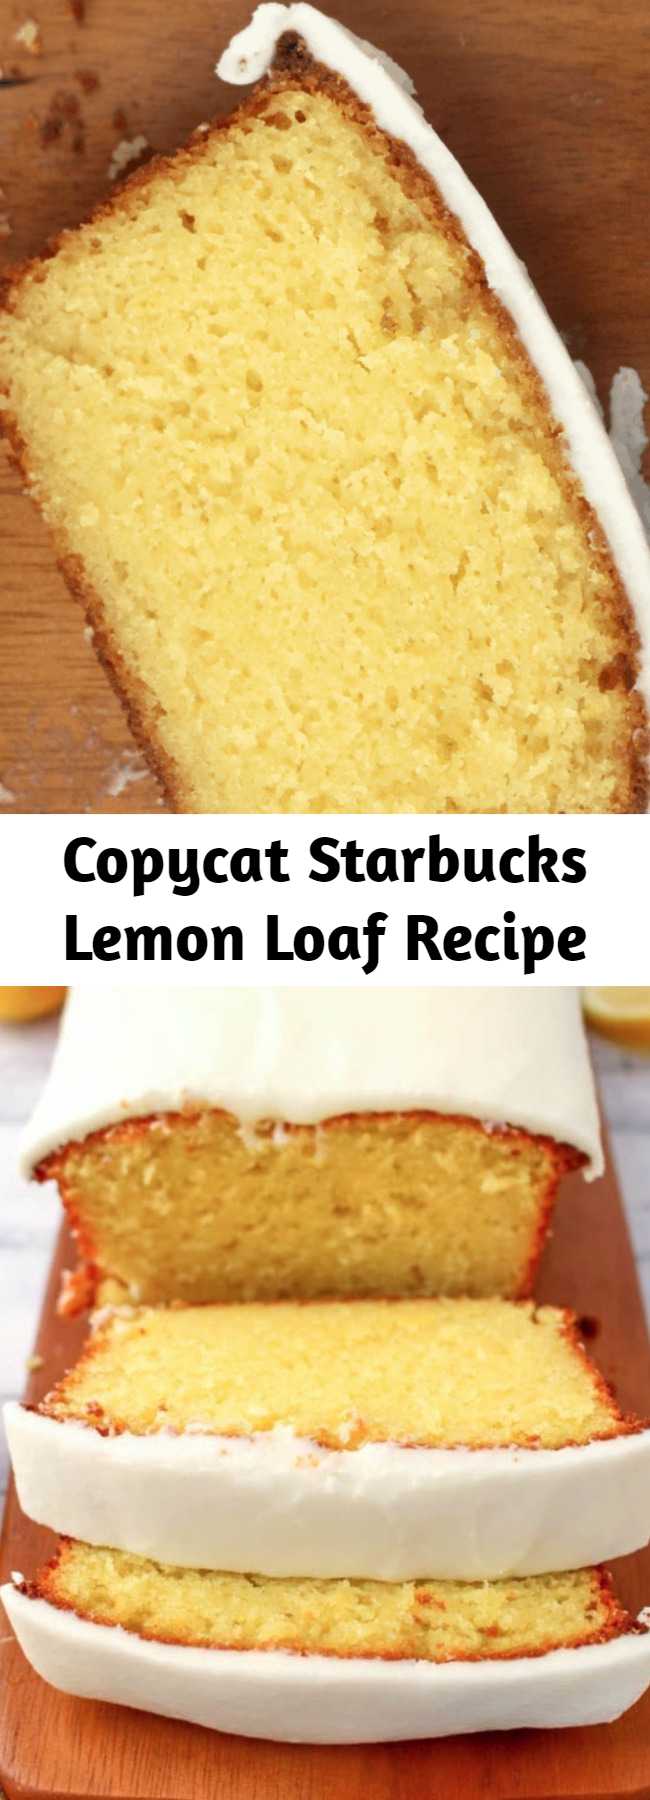 Copycat Starbucks Lemon Loaf Recipe - If you like Starbucks Lemon Loaf, then you'll love this moist, delicious Lemon cake! This easy to make recipe is loaded with delicious lemon flavor, and topped with an amazing lemon frosting.